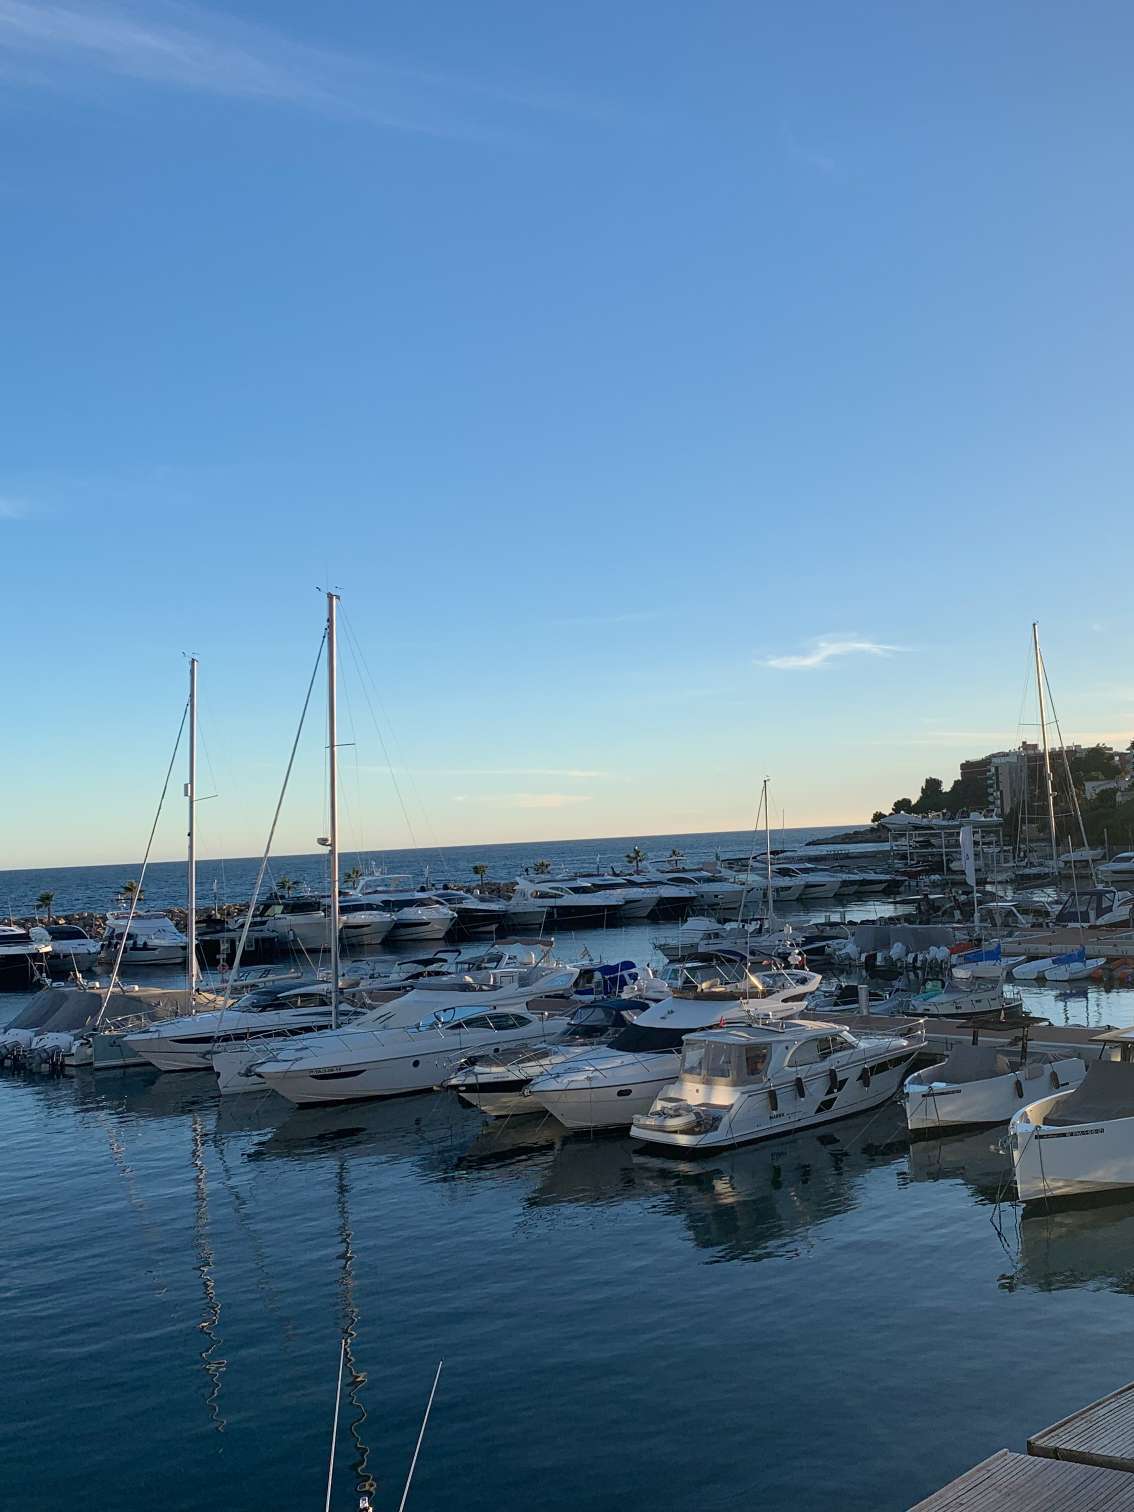 View of yachts in a Mediterranean harbour